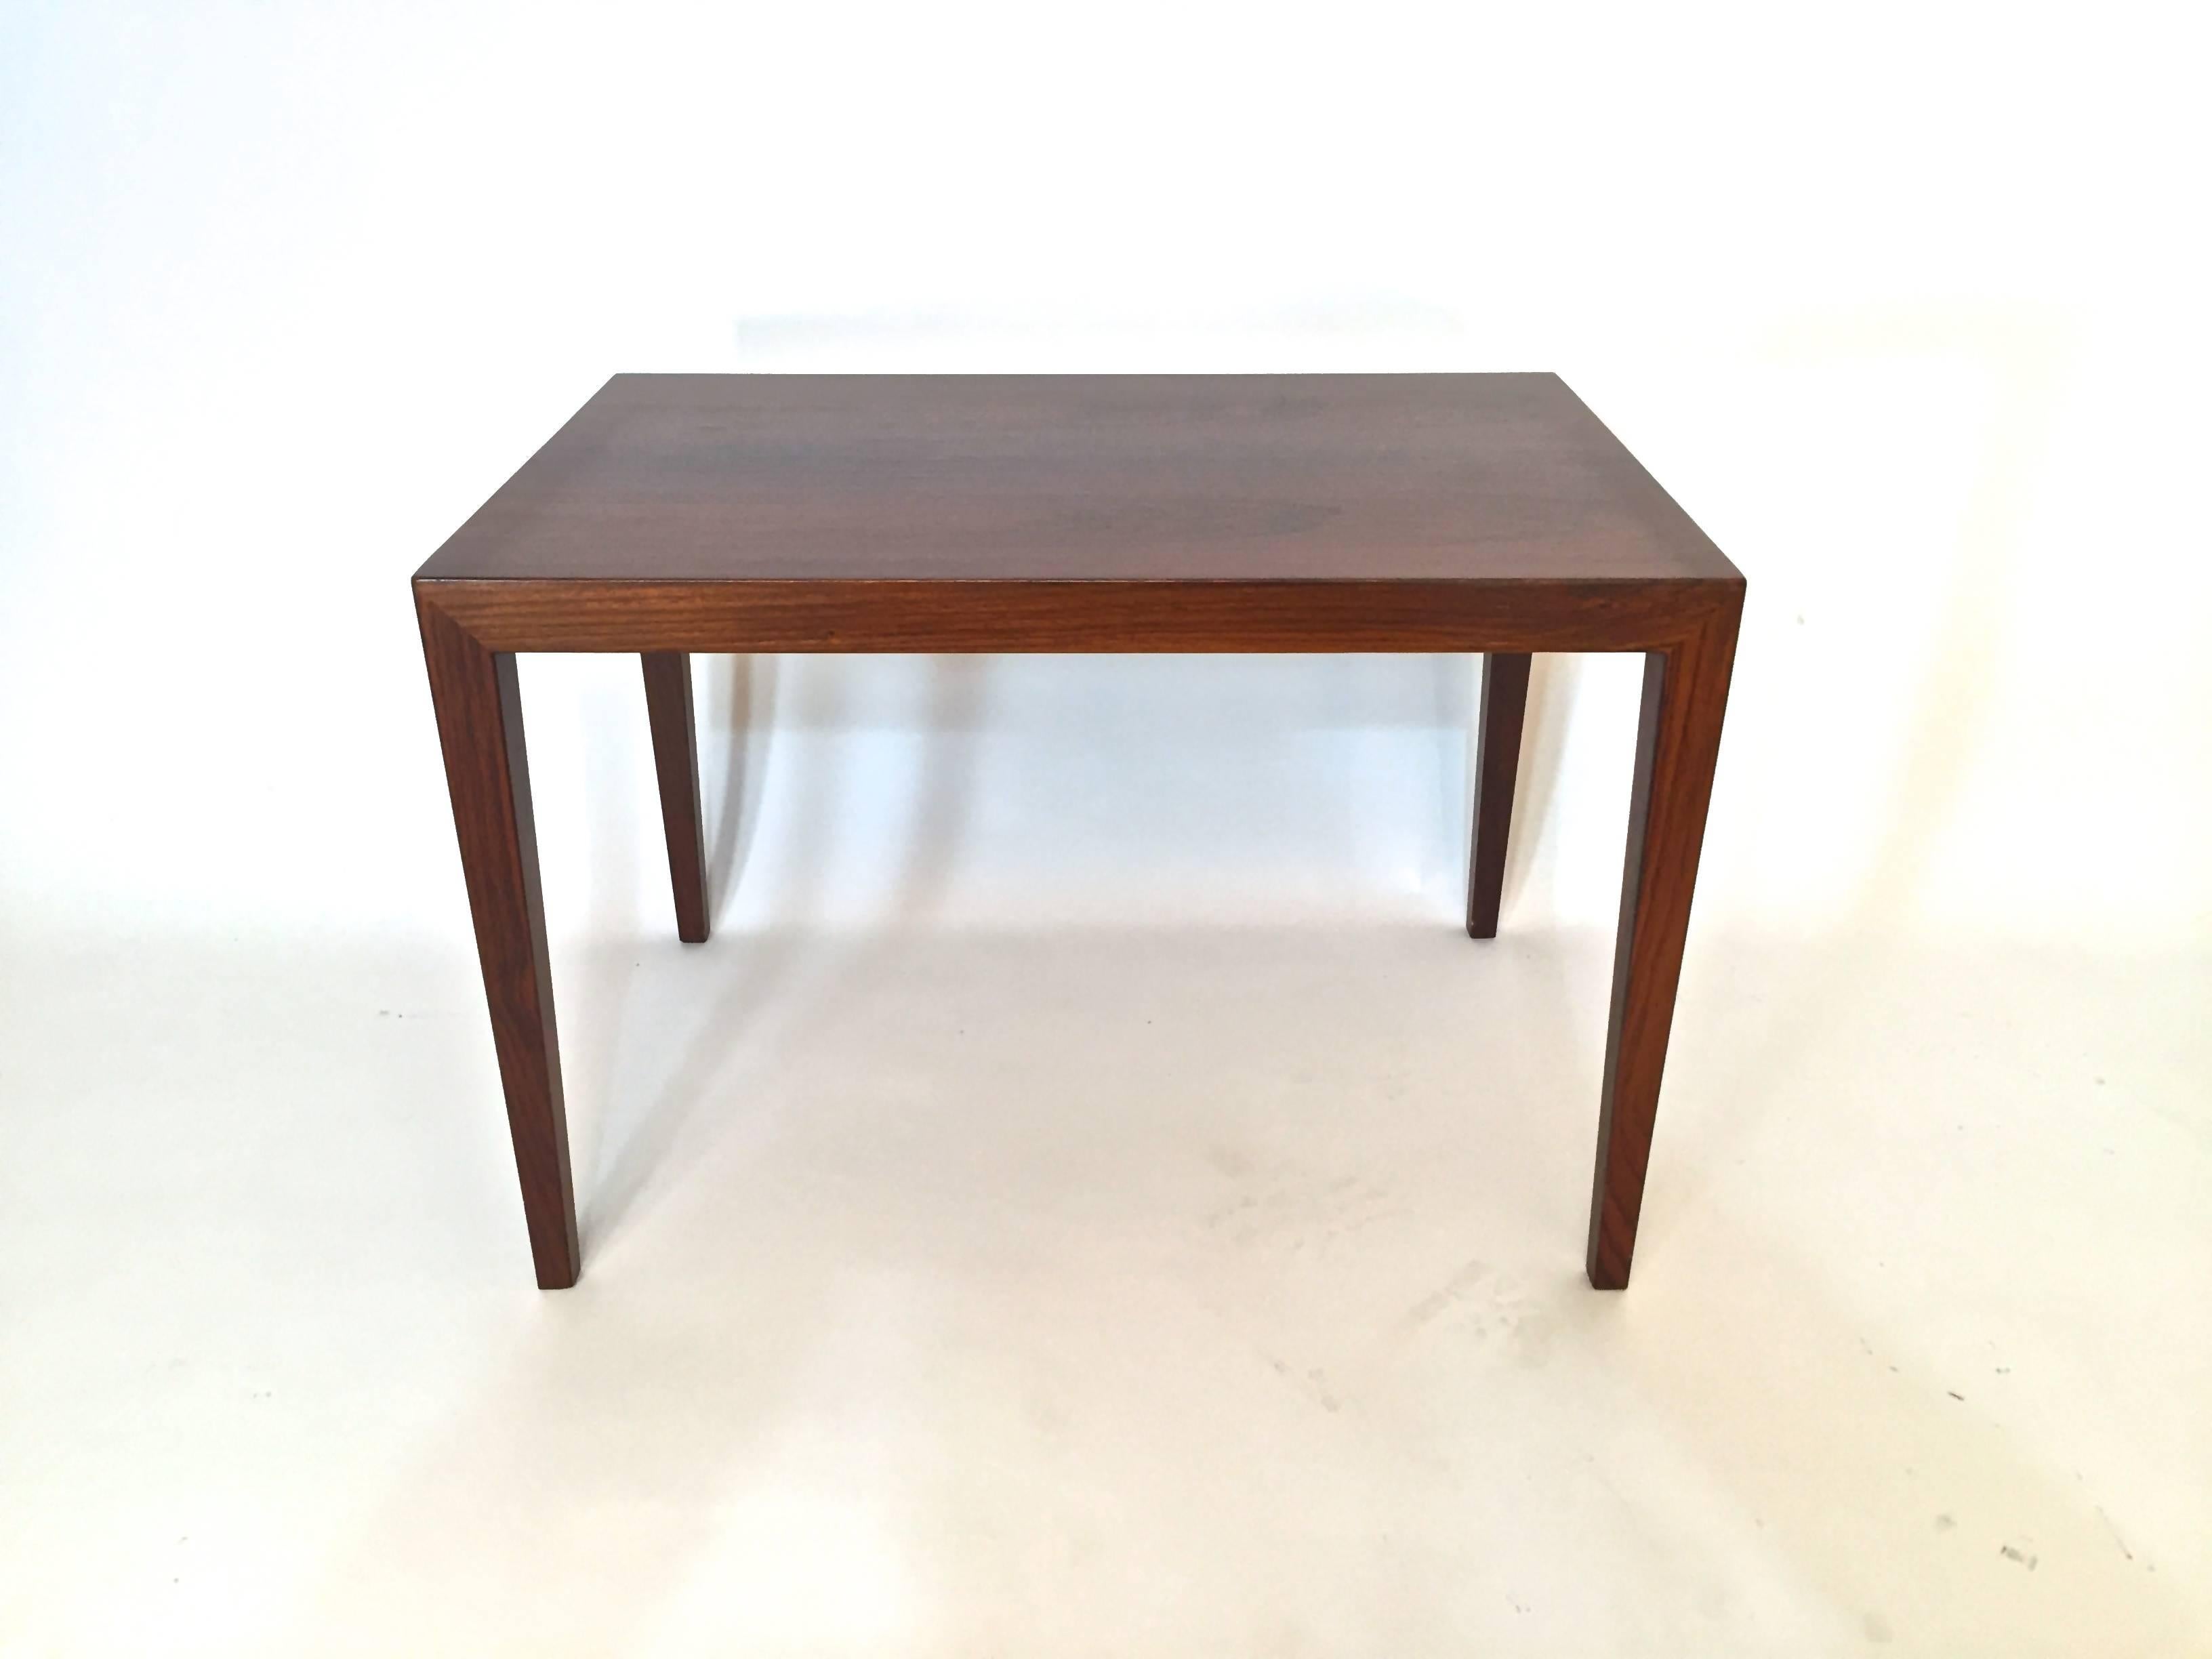 Severin Hansen design. Top of the line furniture was sold through the famous Danish department store, Illums Bolighus. Beautifully figured rosewood top with elegantly tapered rosewood legs. Good overall condition. Some crazing and dryness to the top